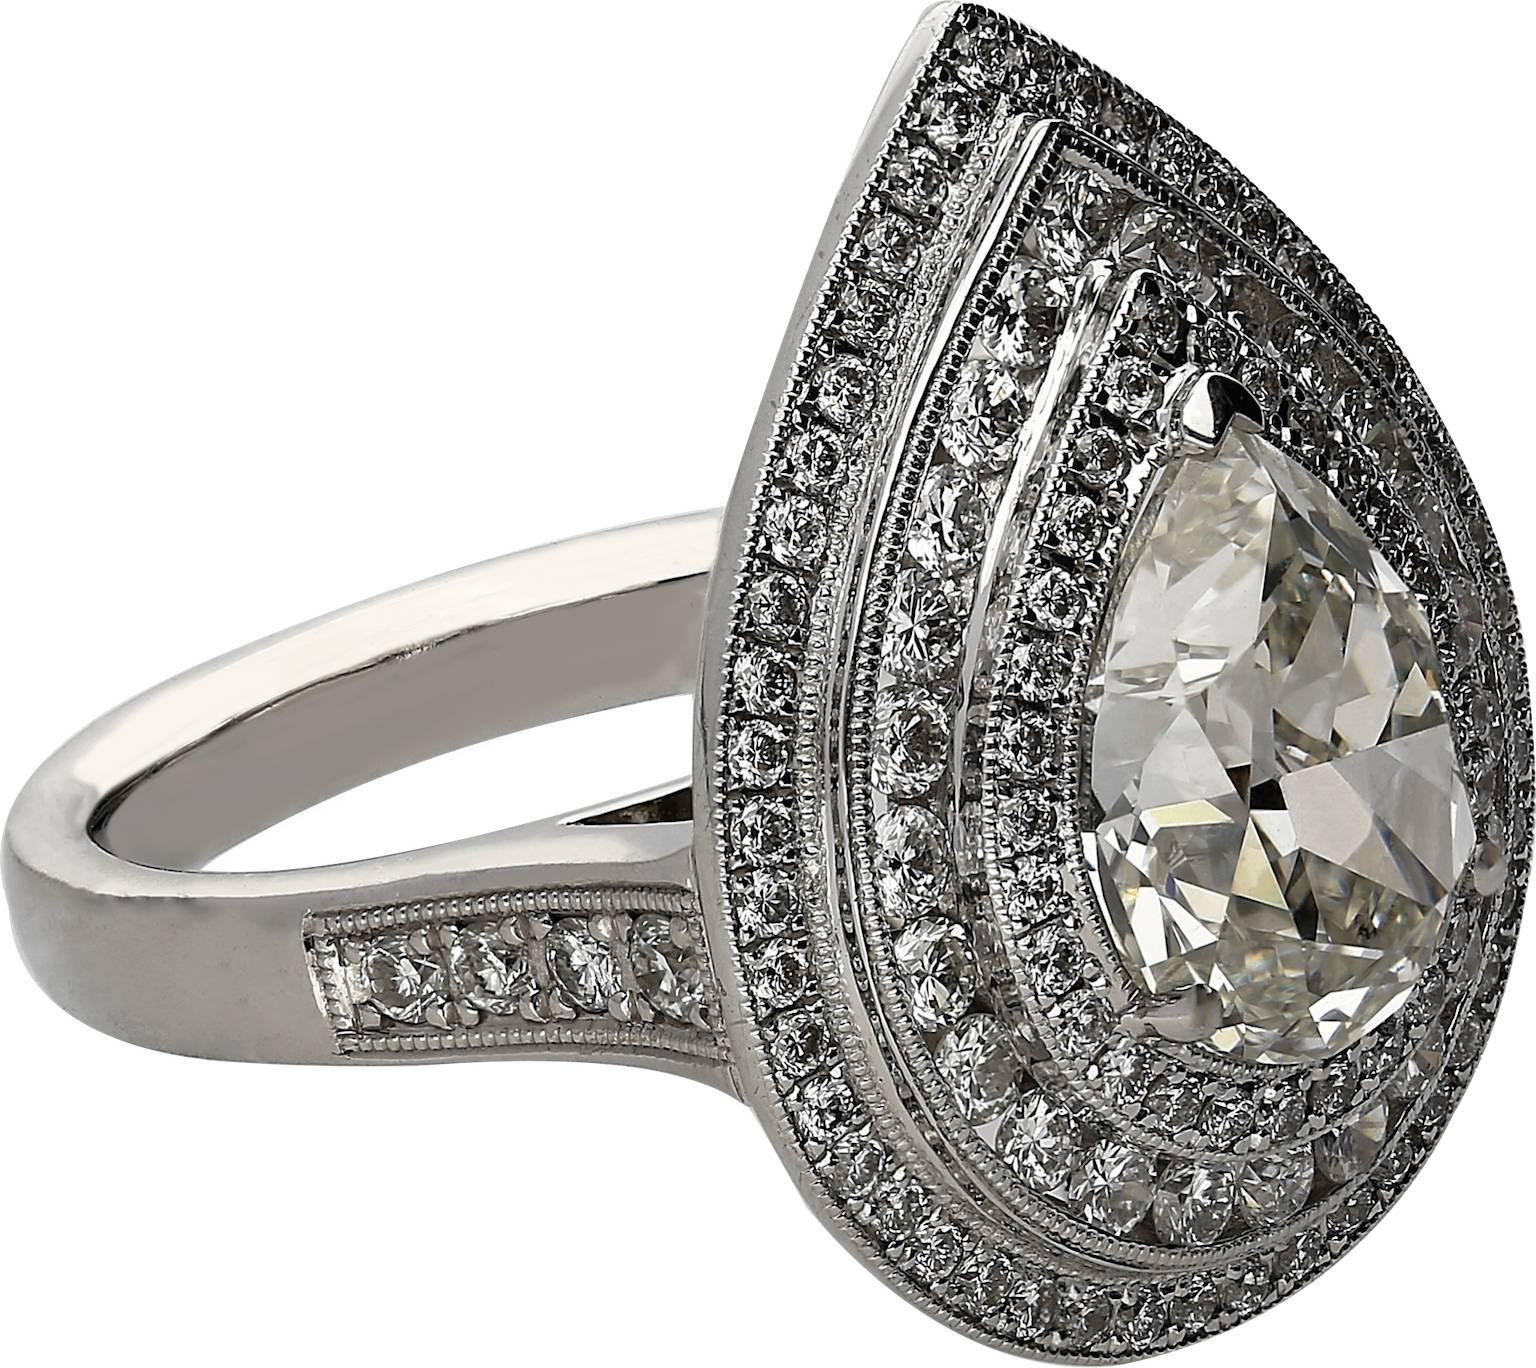 Set in 18k white gold.
Total Diamond weight 4.63 carats. 
Certified by GIA to be of "J" Color and "SI2" Clarity.
